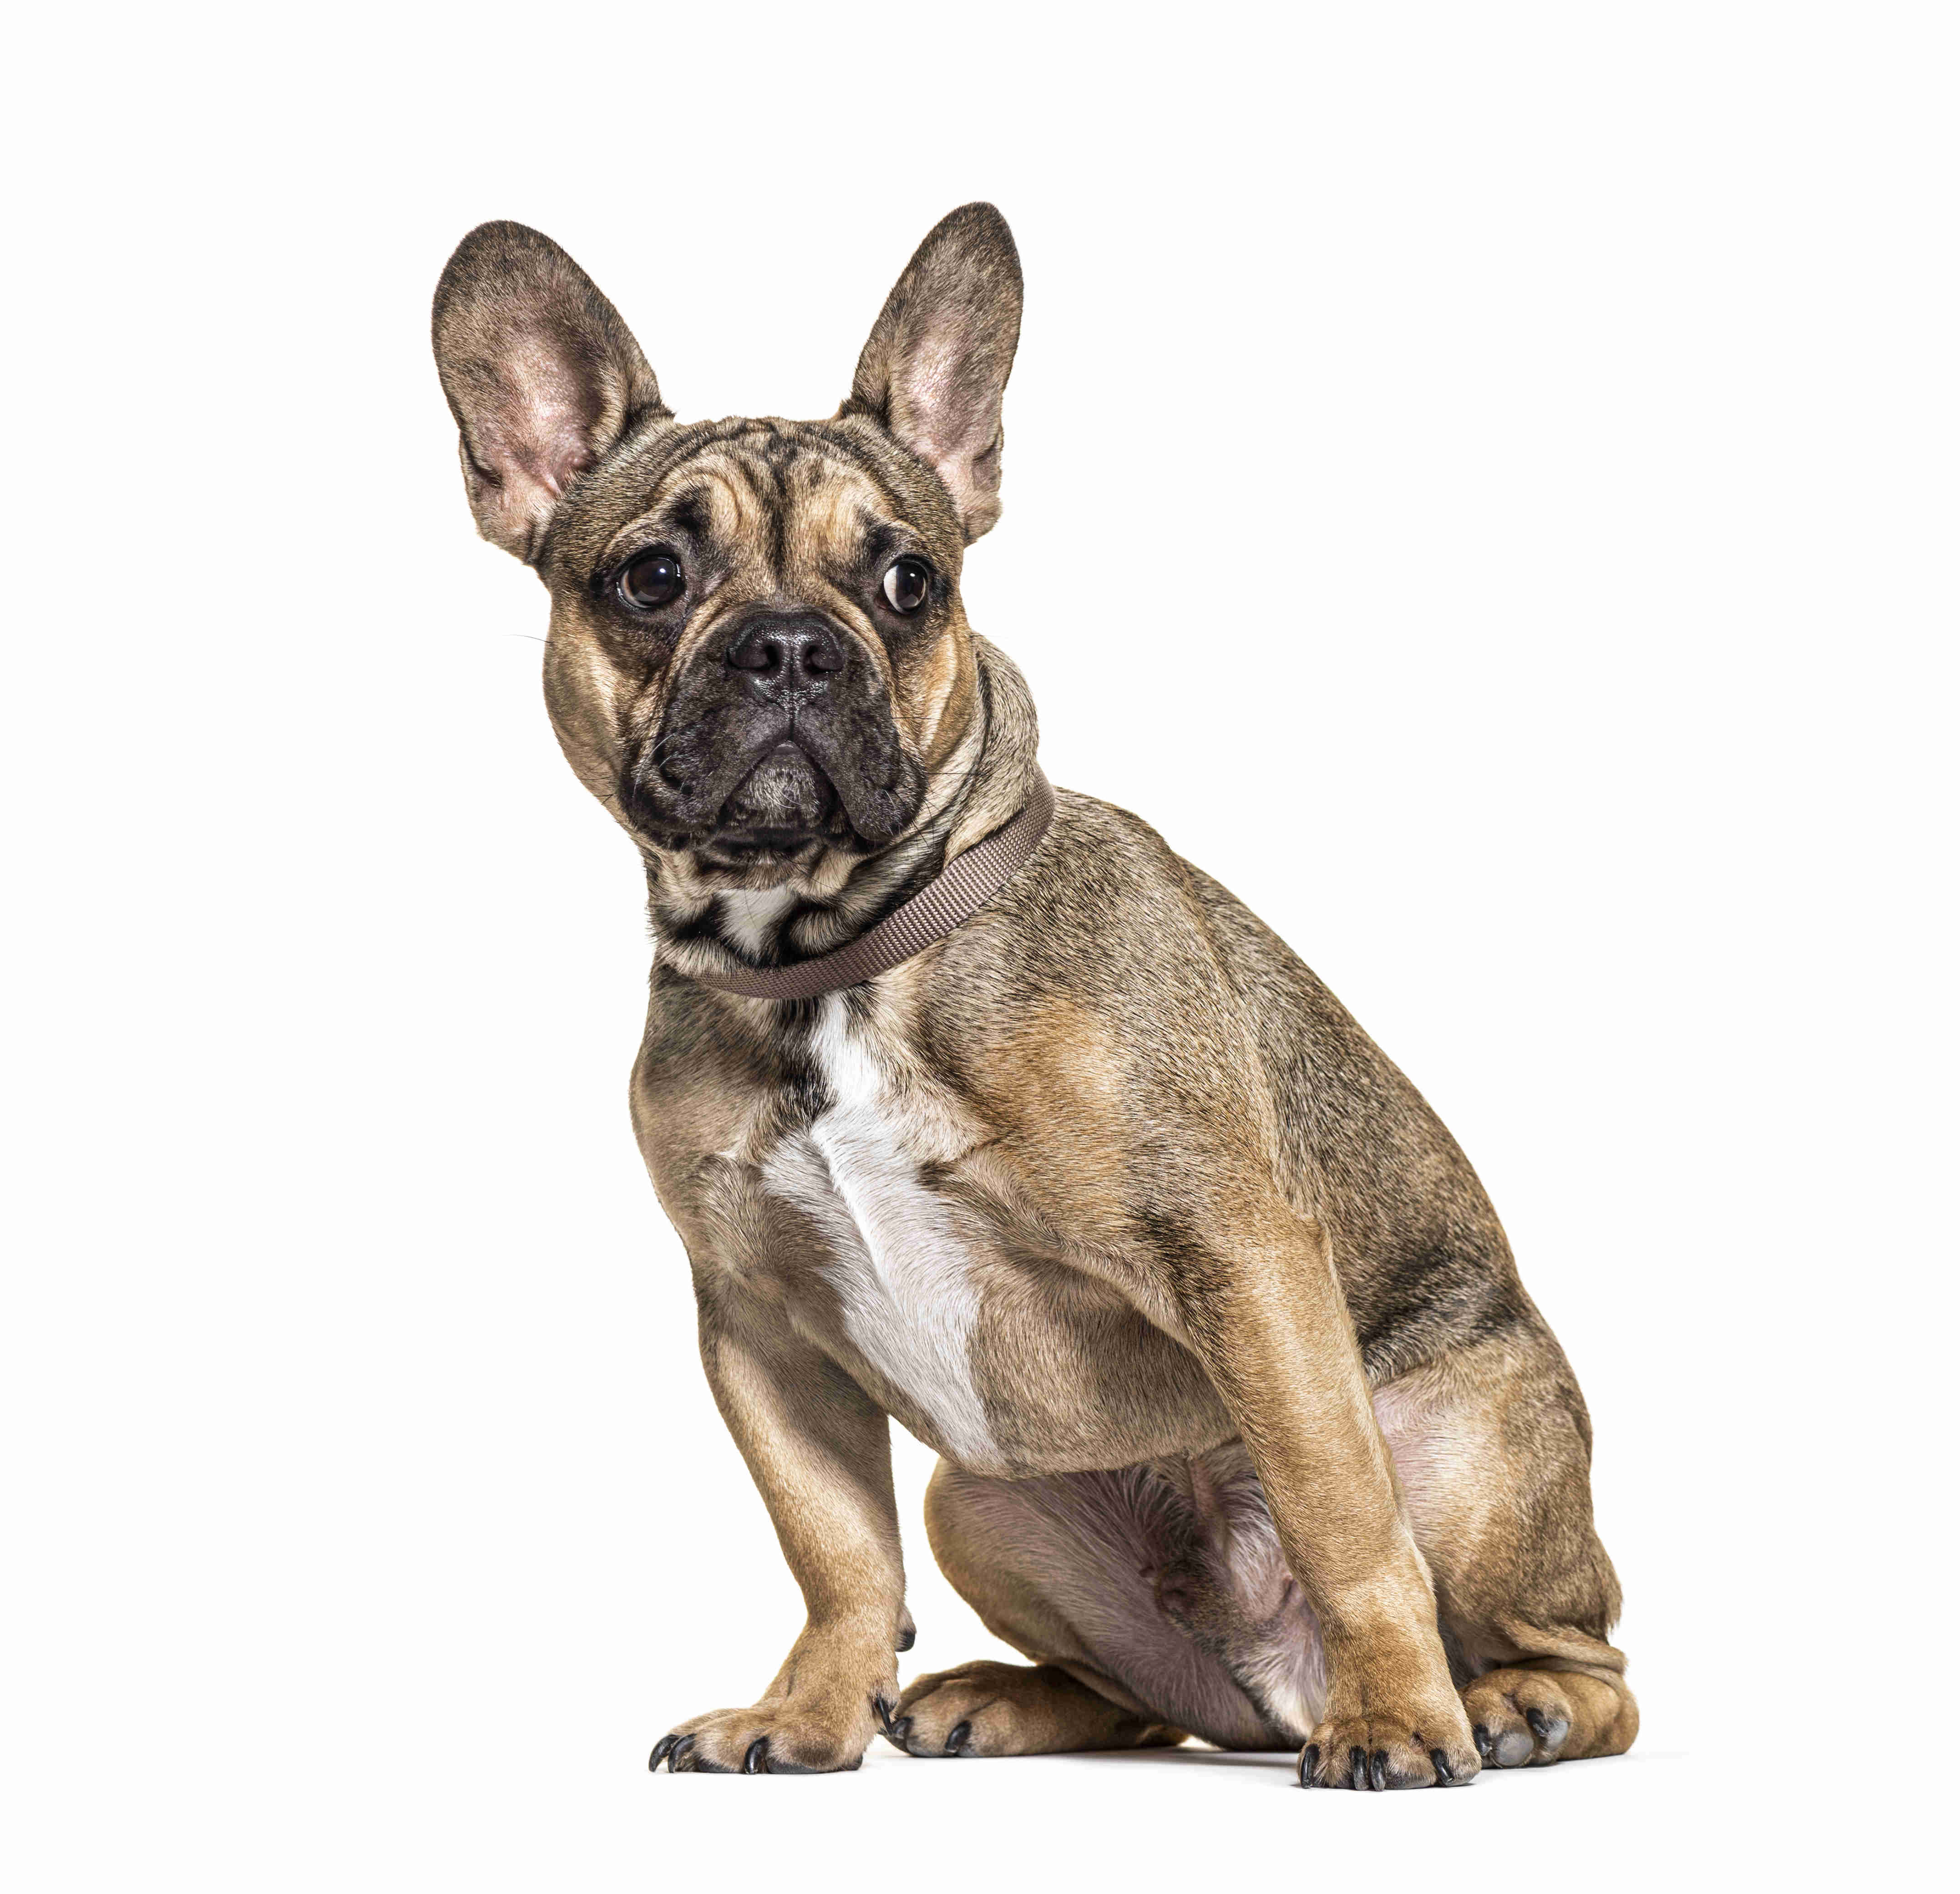 French Bulldog Puppy Exercise: What Activities Are Safe and Effective?